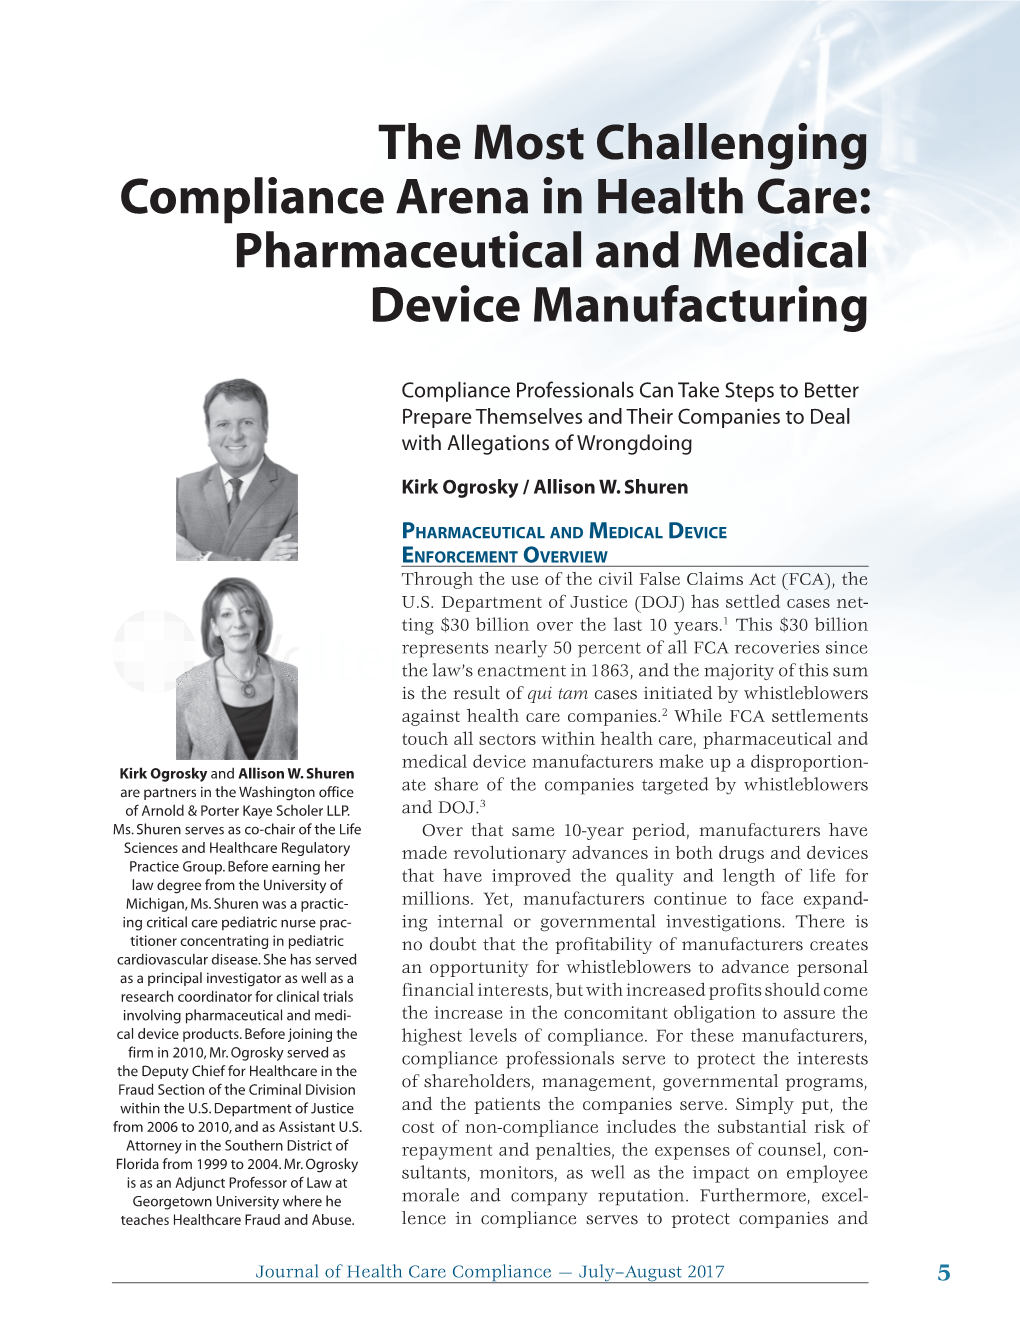 The Most Challenging Compliance Arena in Health Care: Pharmaceutical and Medical Device Manufacturing